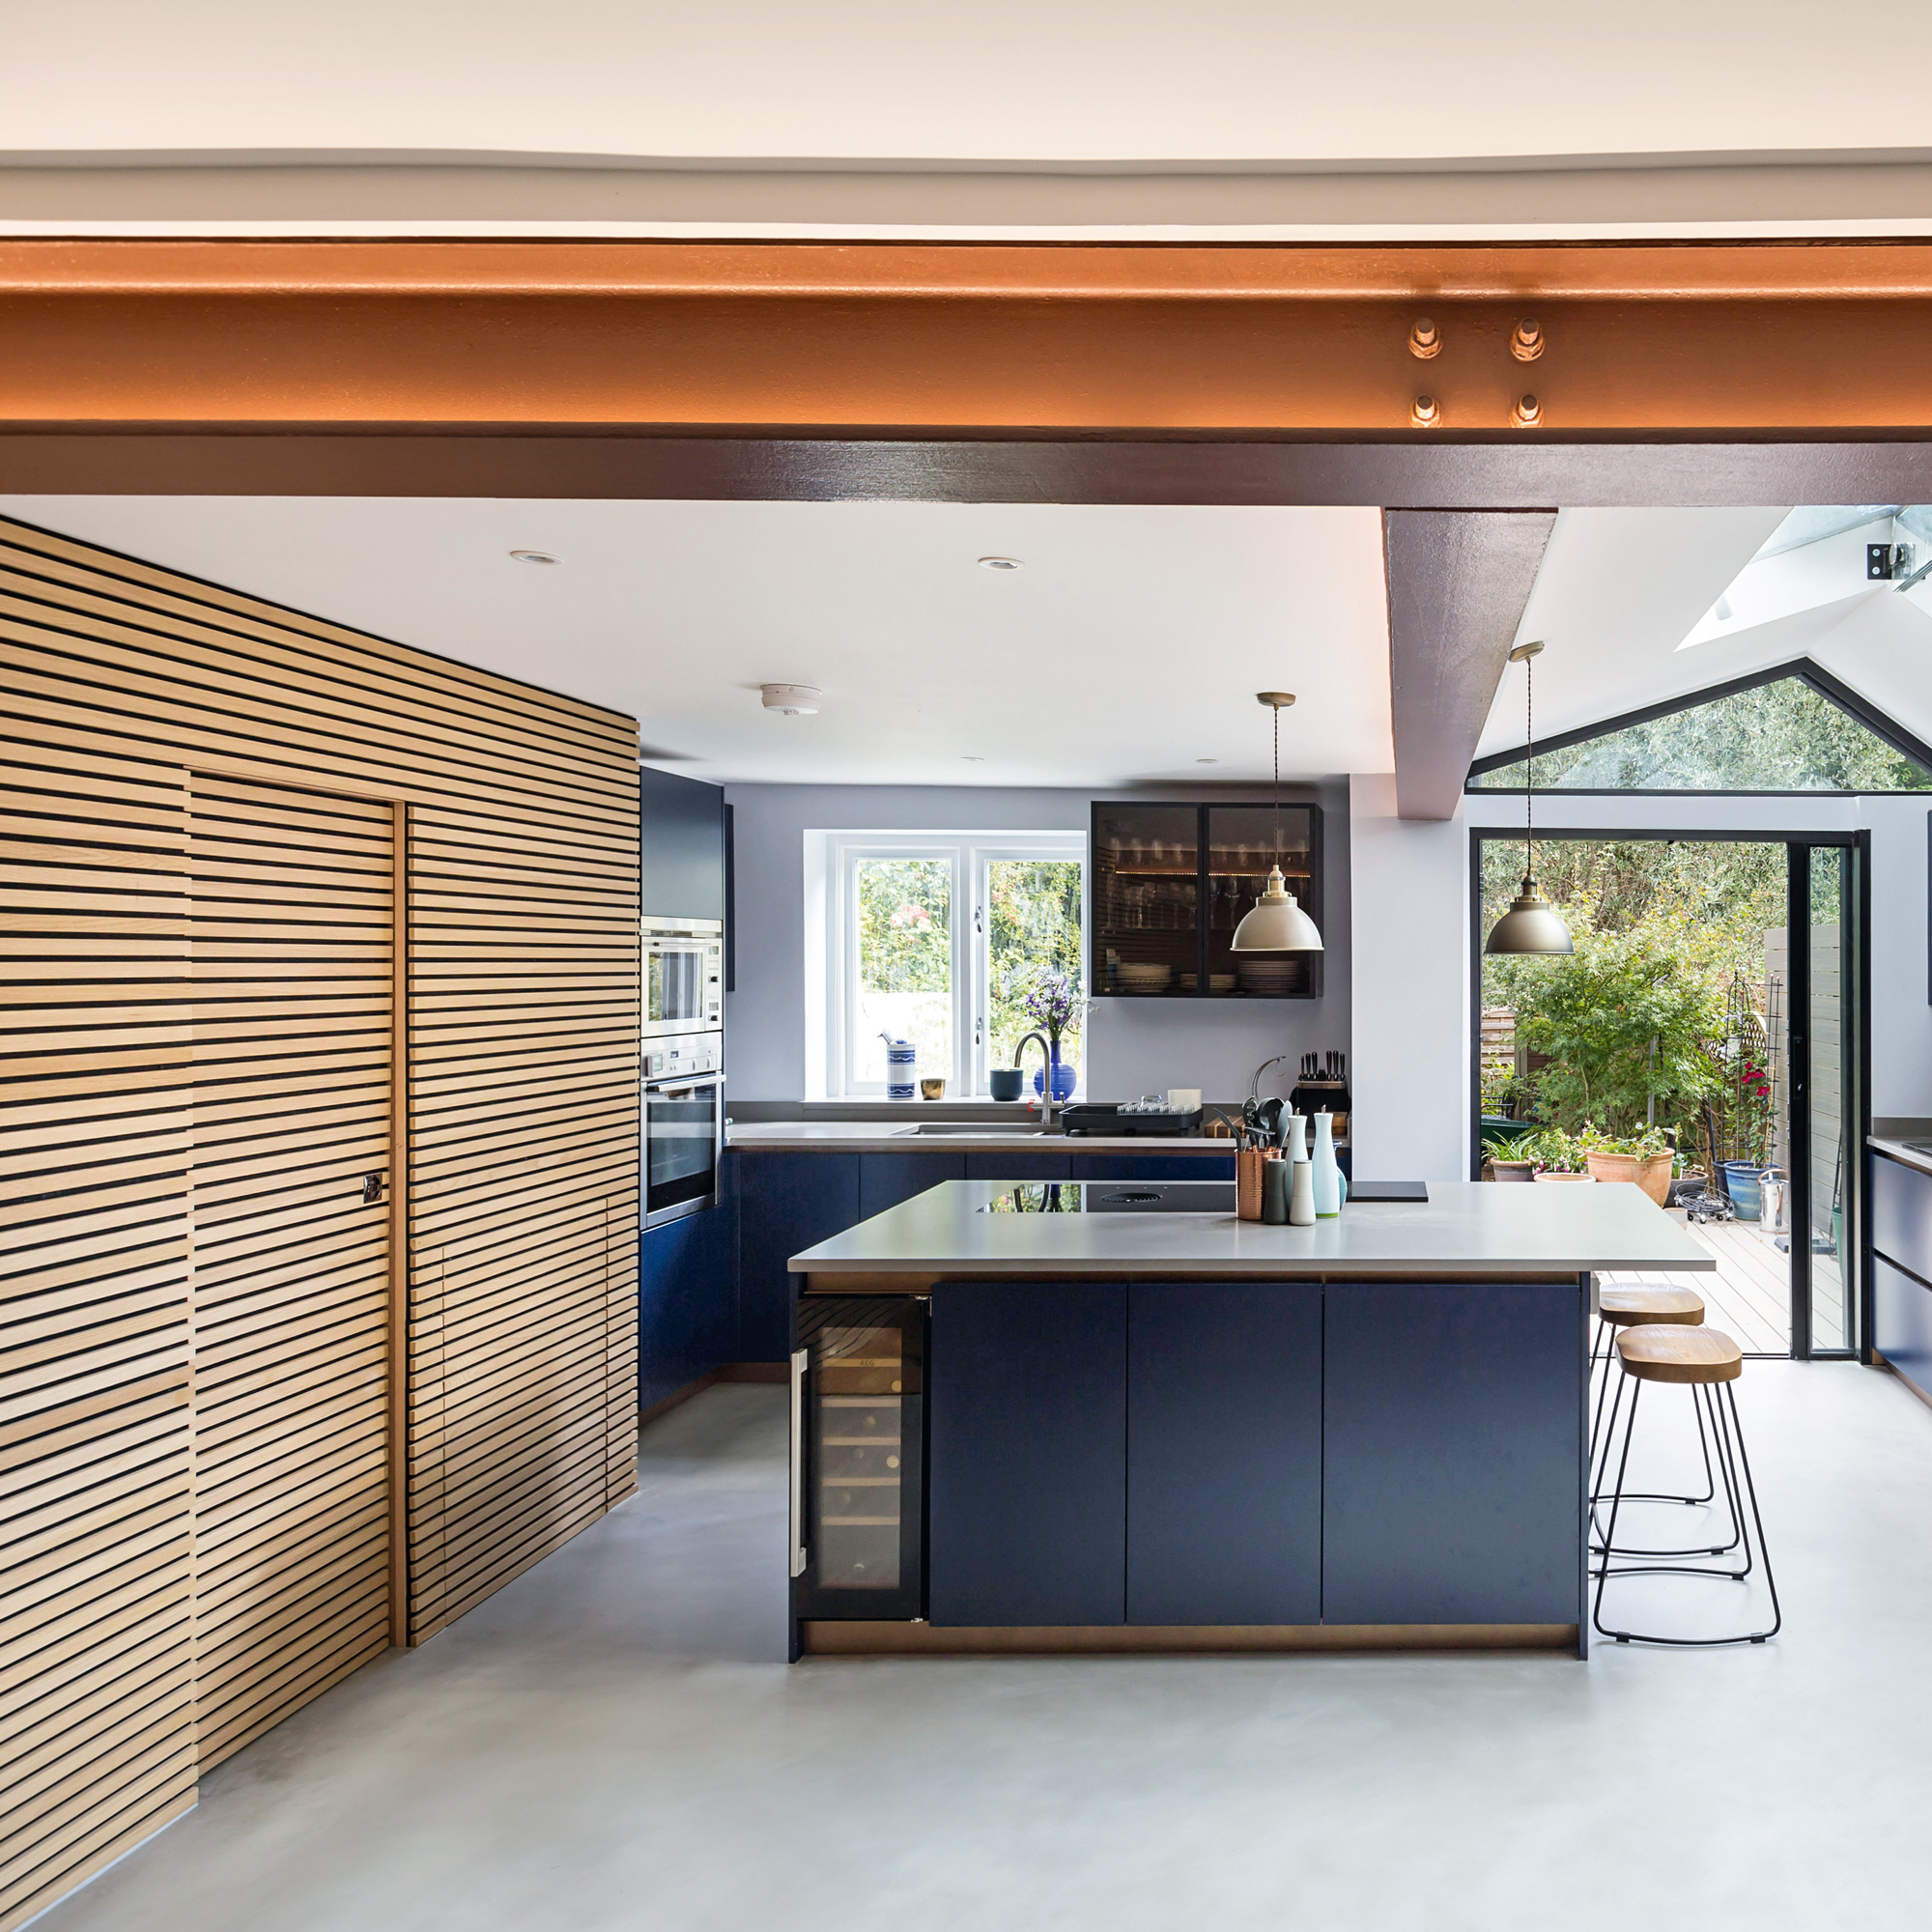 a kitchen with navy blue kitchen cabinetry. kitchen island and a copper coloured RSJ